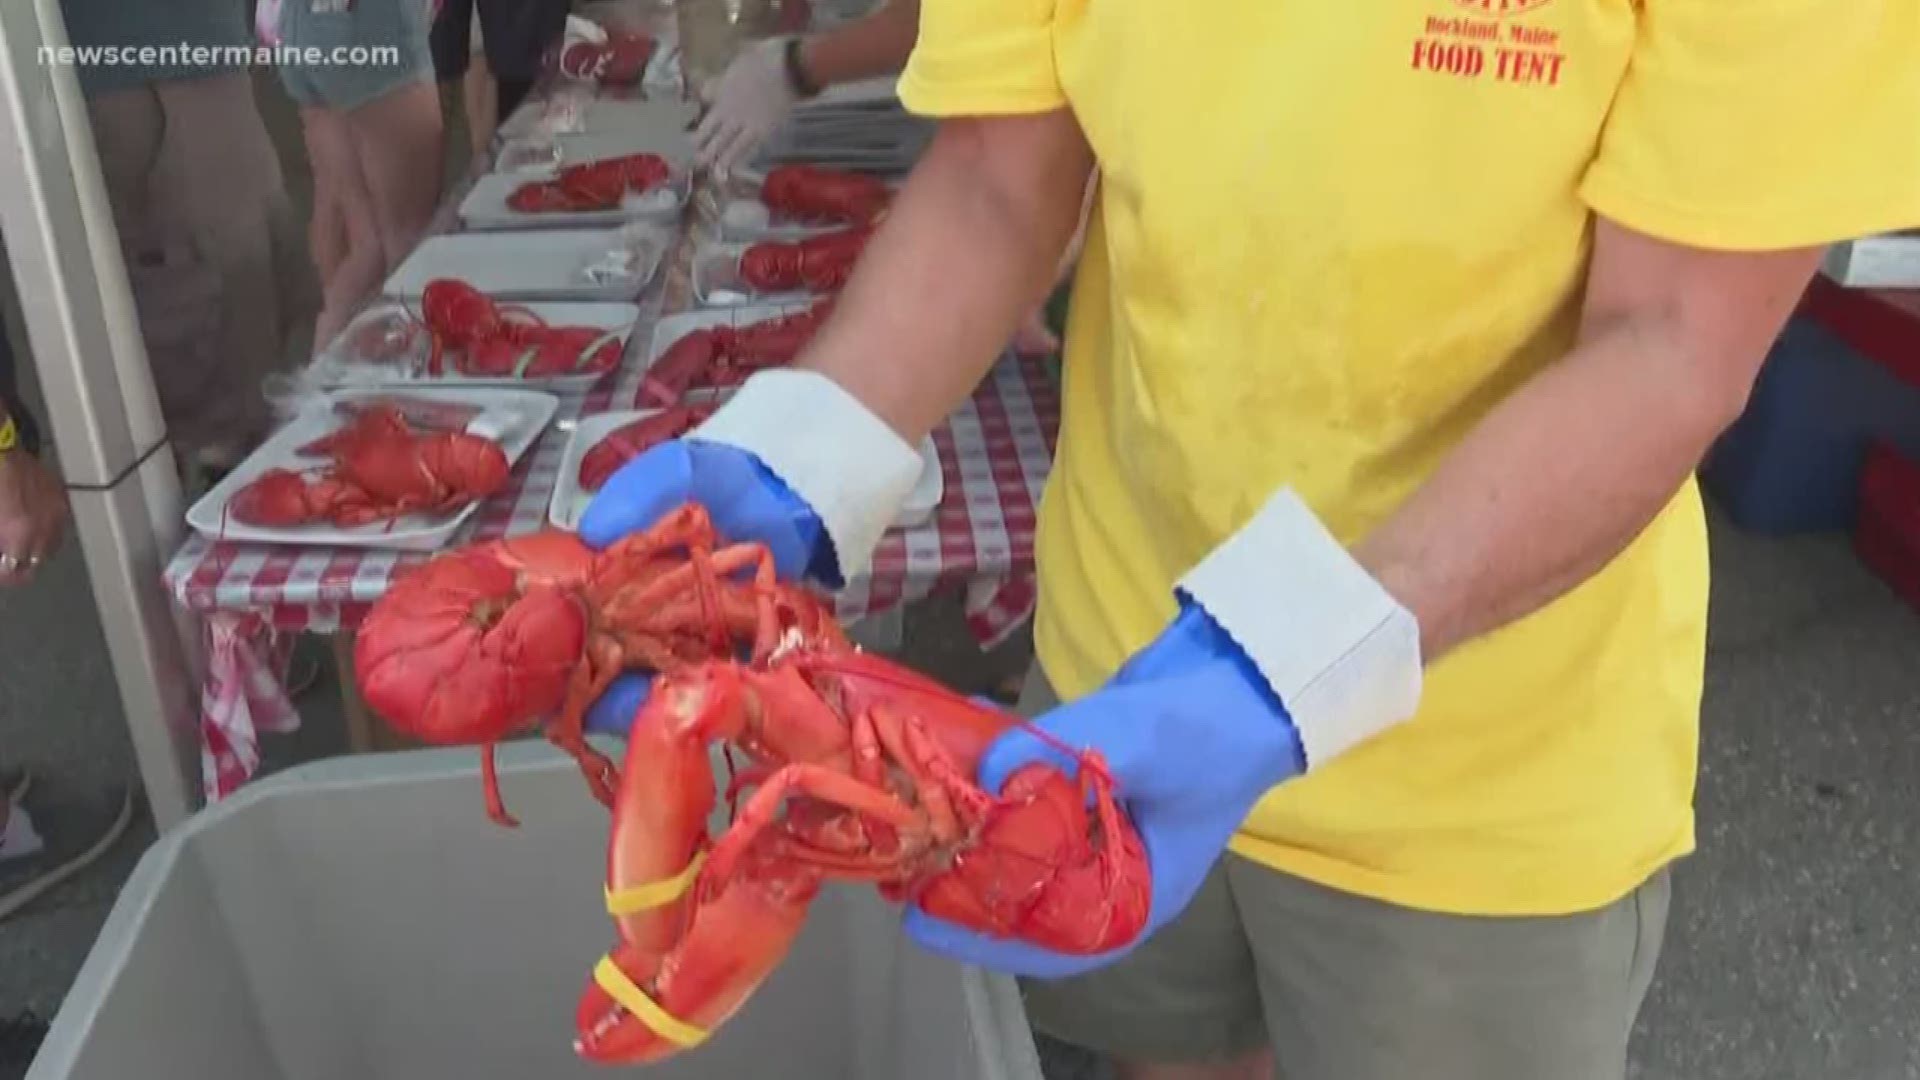 After the 'Maine Sea Goddess' was stripped from her title last year, the Lobster Festival in Rockland is establishing new policies.